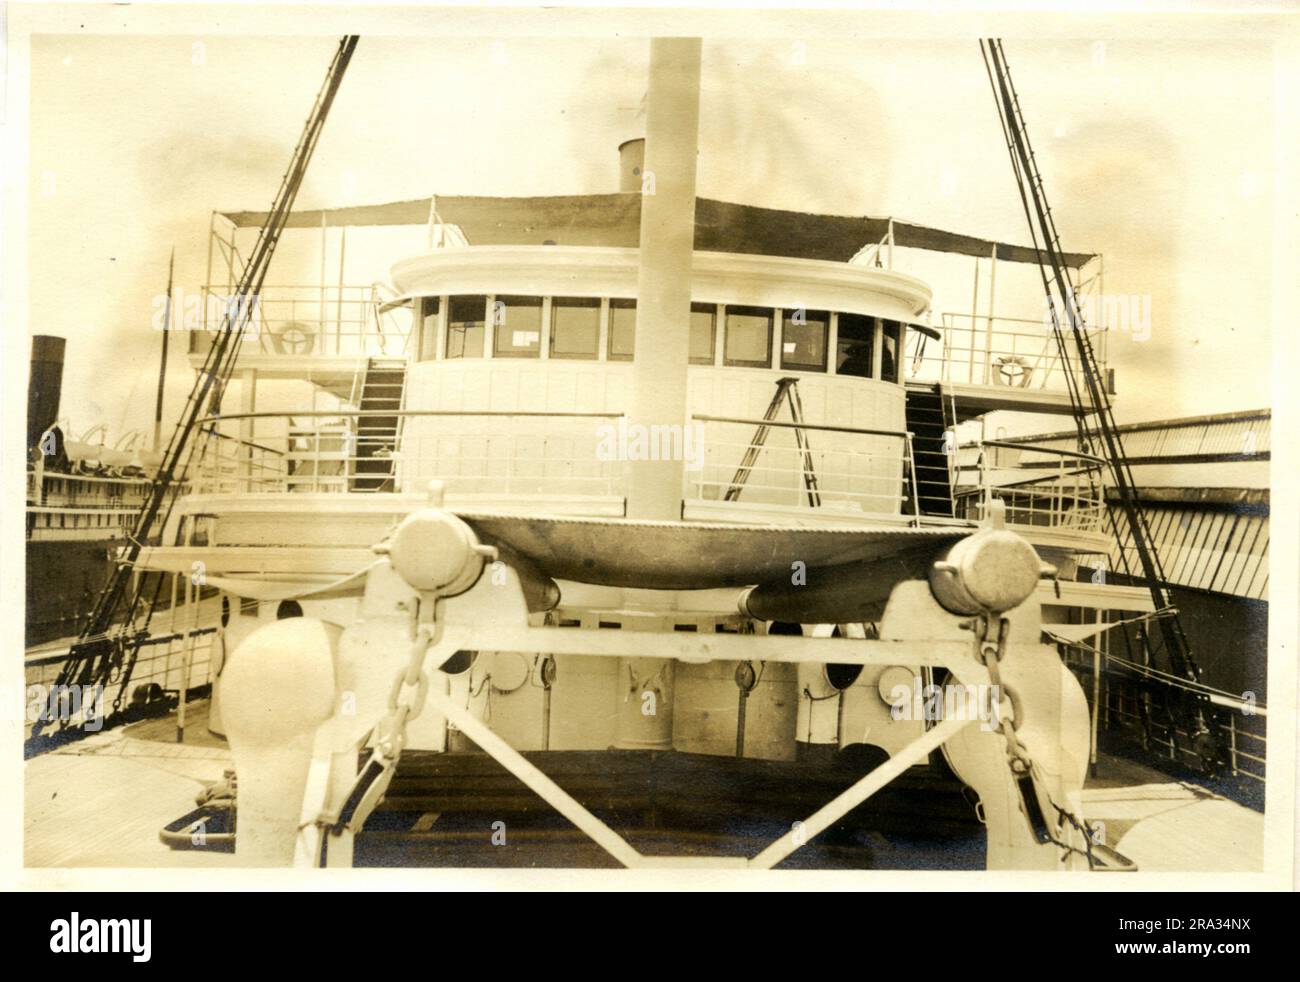 Photograph of the Fore Side of the Bridge of the SS City of St. Louis. Photograph Of Fore Side Of Bridge. Date: - July 19, 1918. Photograph Of: - S. S. City Of St Louis. Nationality: - American. Tonnage: - 5425. Captain: - L. Dalzell. Owners: - Ocean S. S. Co. Where From: - Boston, Mass. Destination: - Boston, Mass. Where Photographed: - Savannah, GA. Sixth Naval District. By Whom Photographed: - J. B. Dearborn. Date Photographed: - July 13th., 1918.. 1918-07-13T00:00:00. Stock Photo